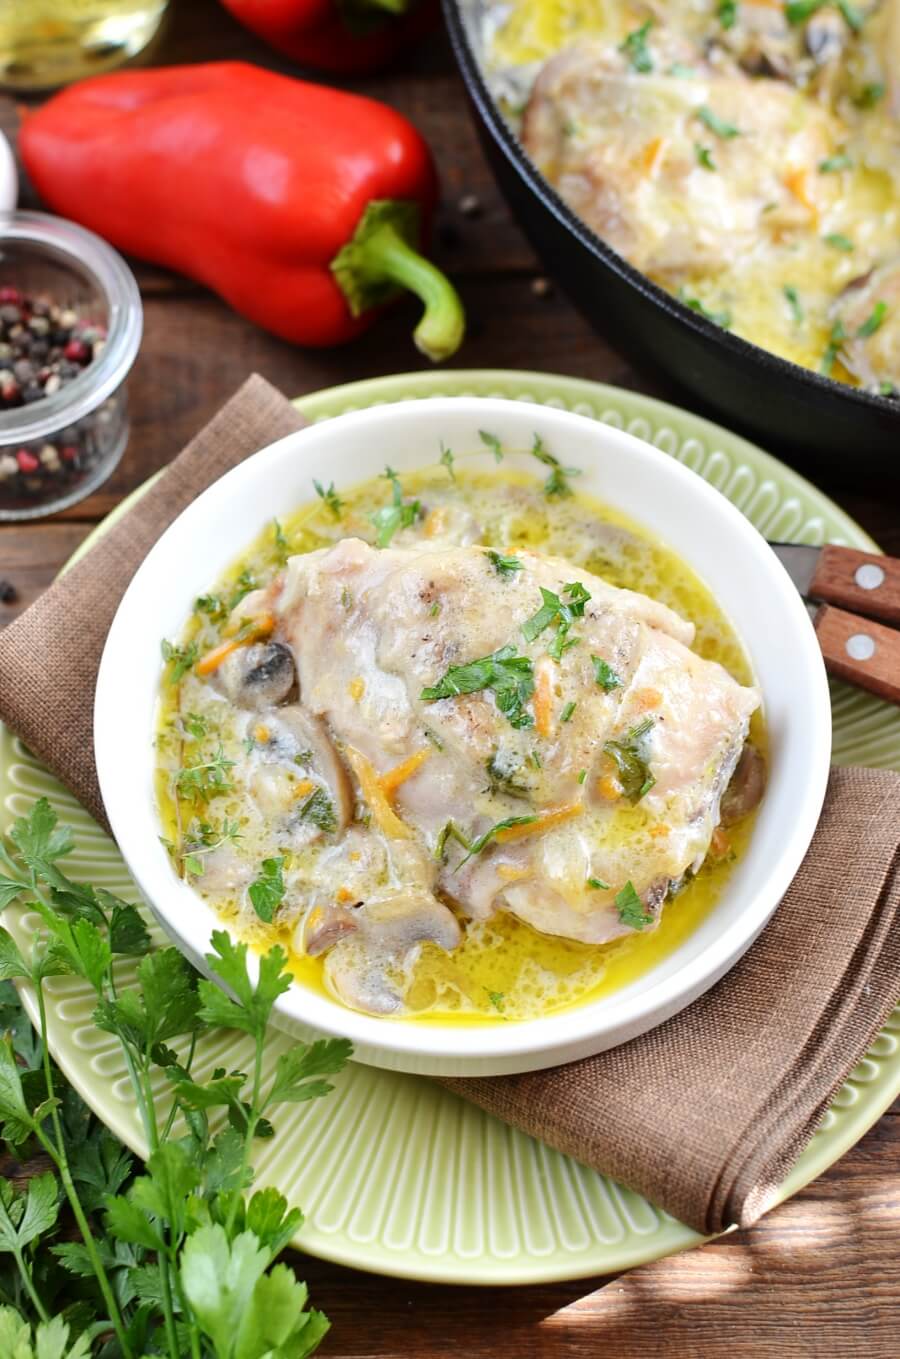 Best Chicken Fricassee Recipe - Cook.me Recipes